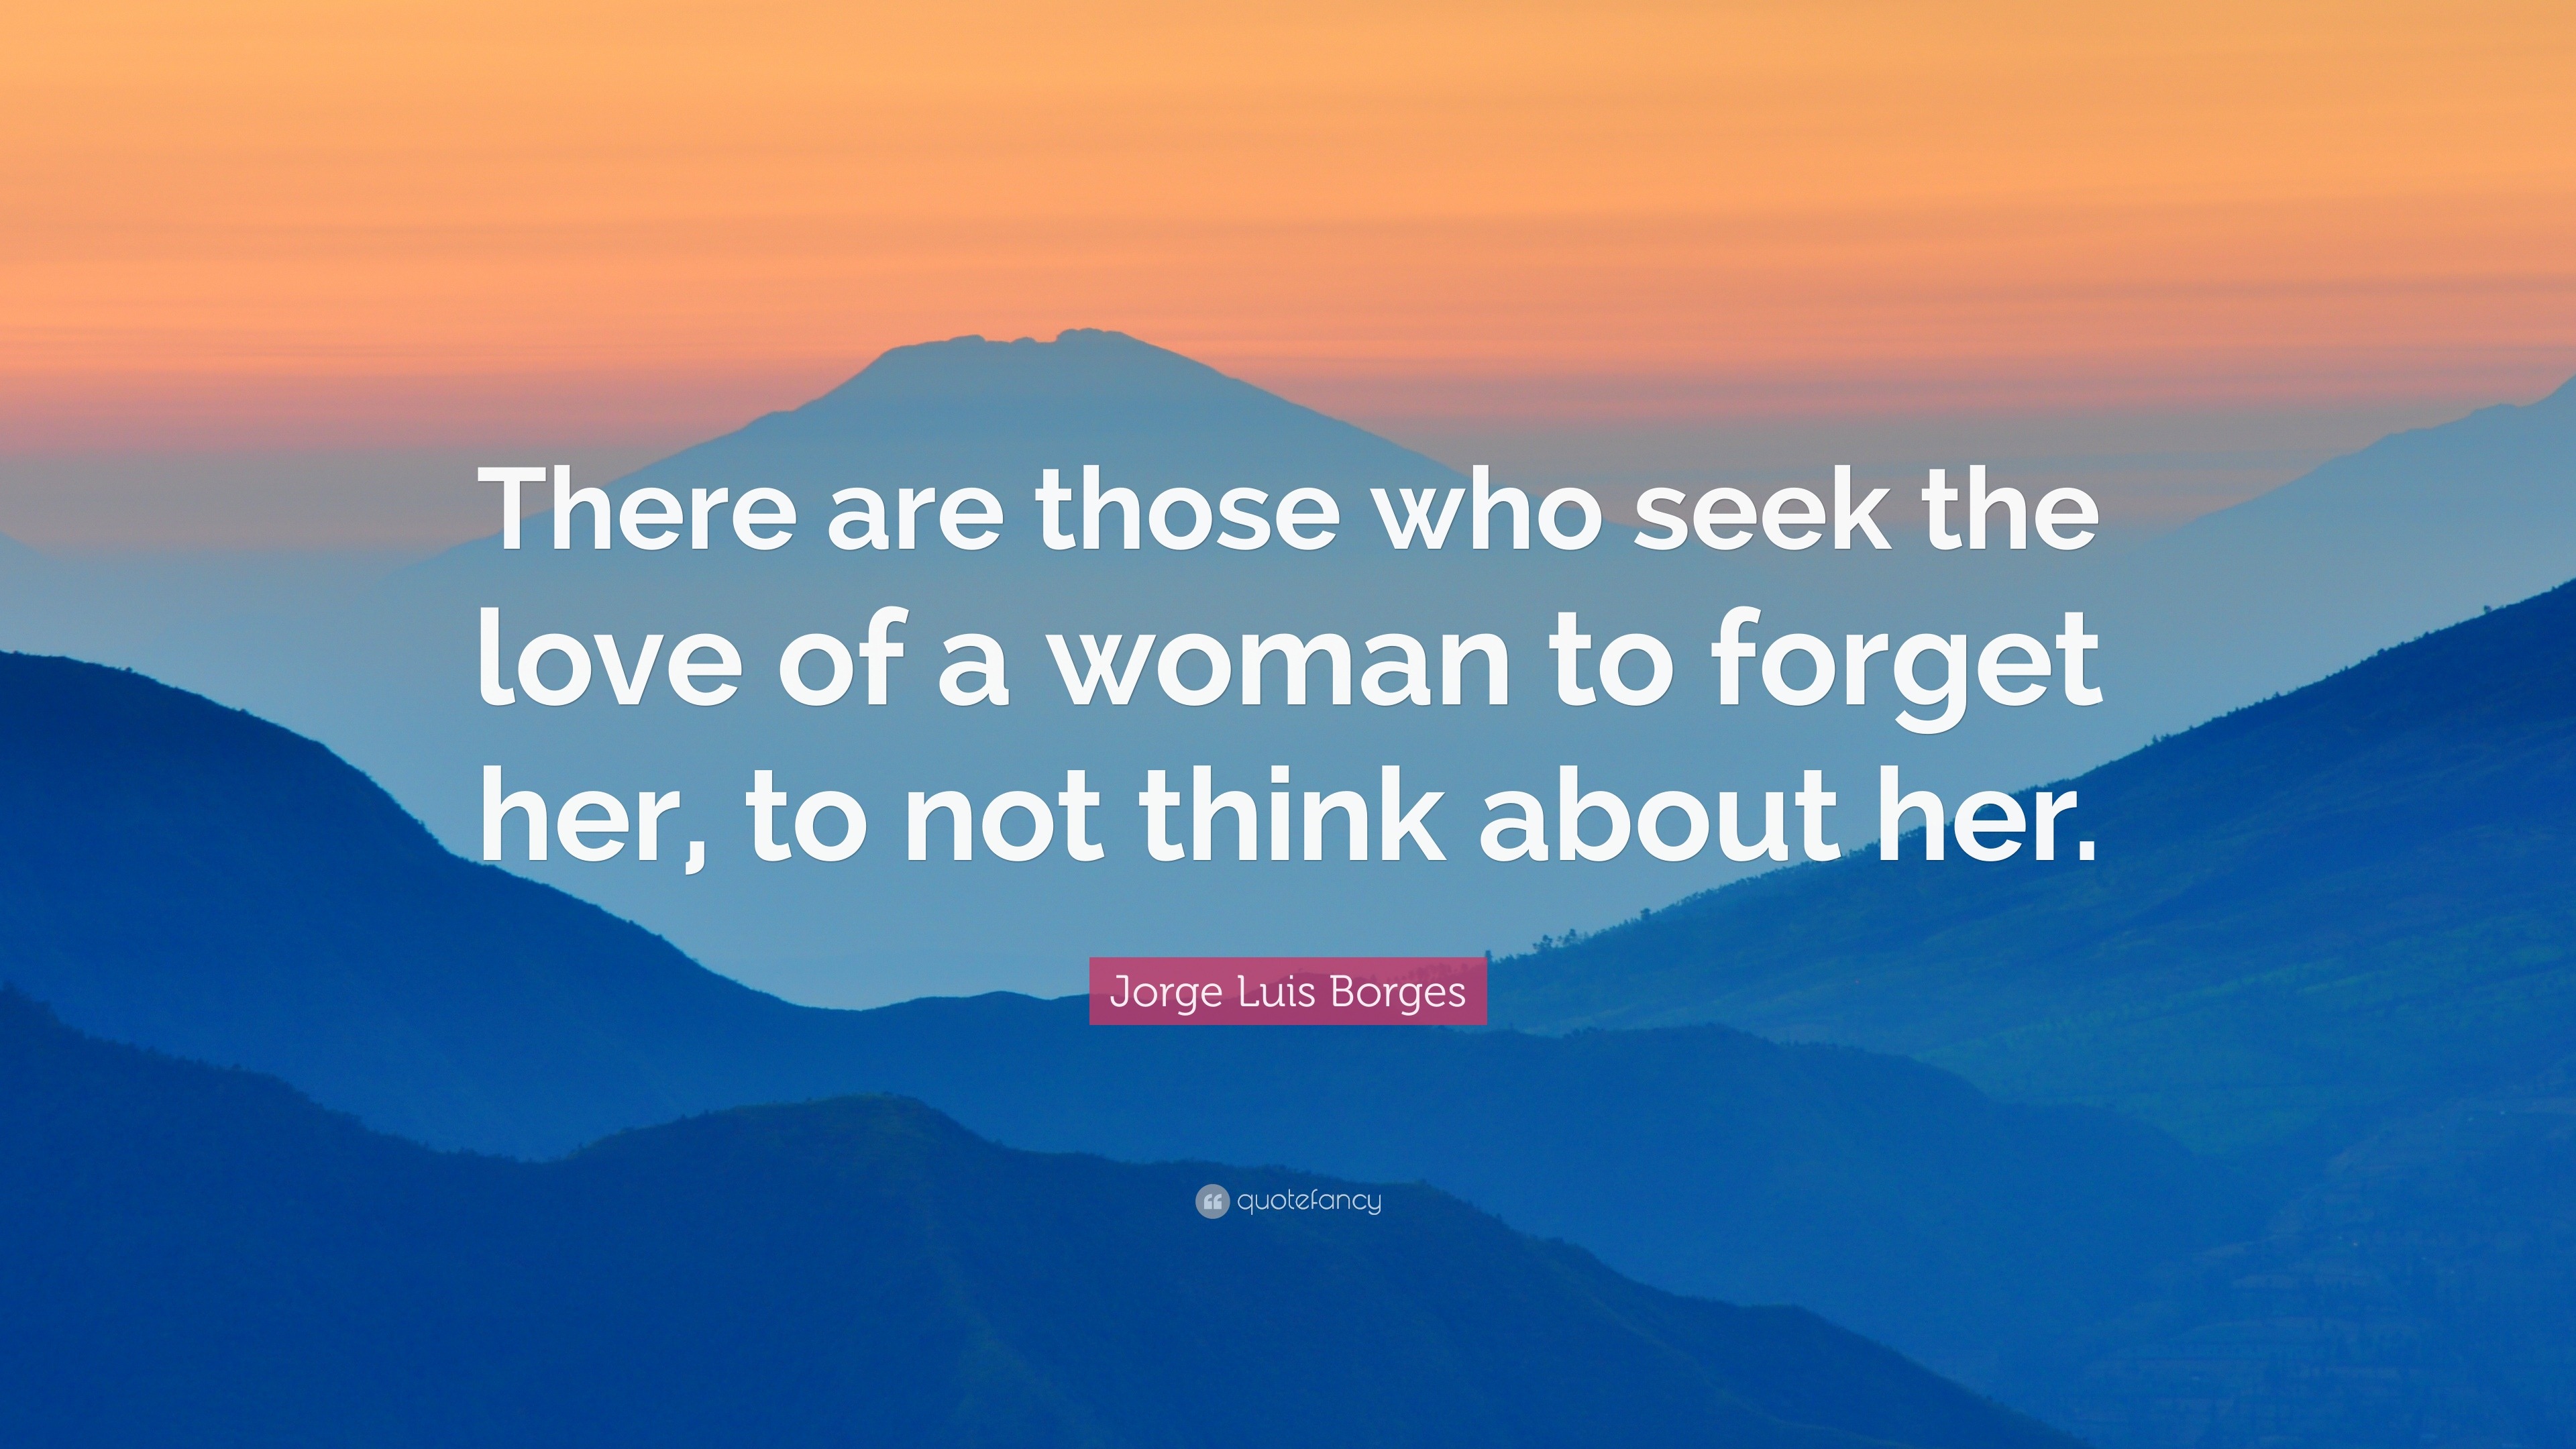 Jorge Luis Borges Quote: “There are those who seek the love of a woman ...